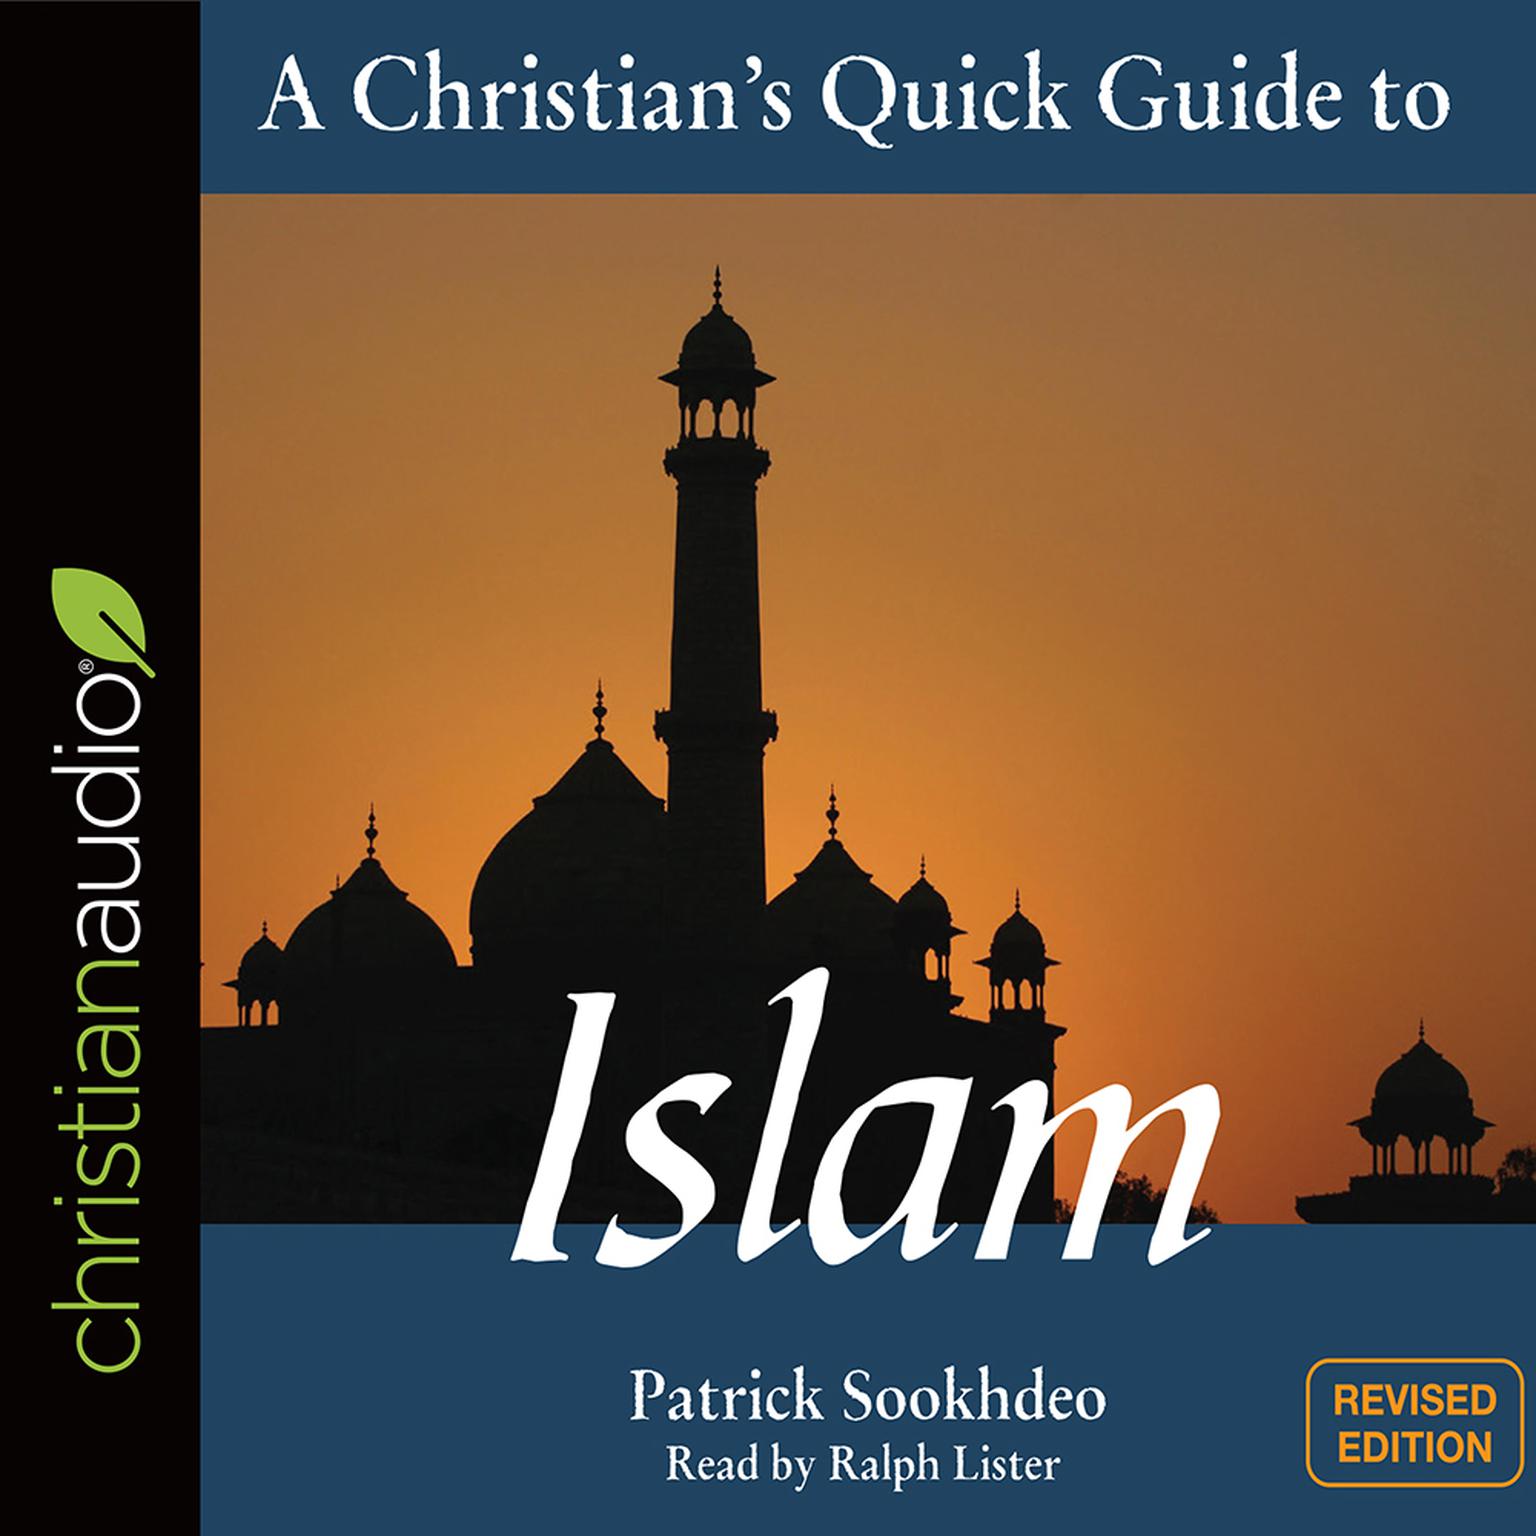 Christians Quick Guide to Islam: Revised Edition Audiobook, by Patrick Sookhdeo